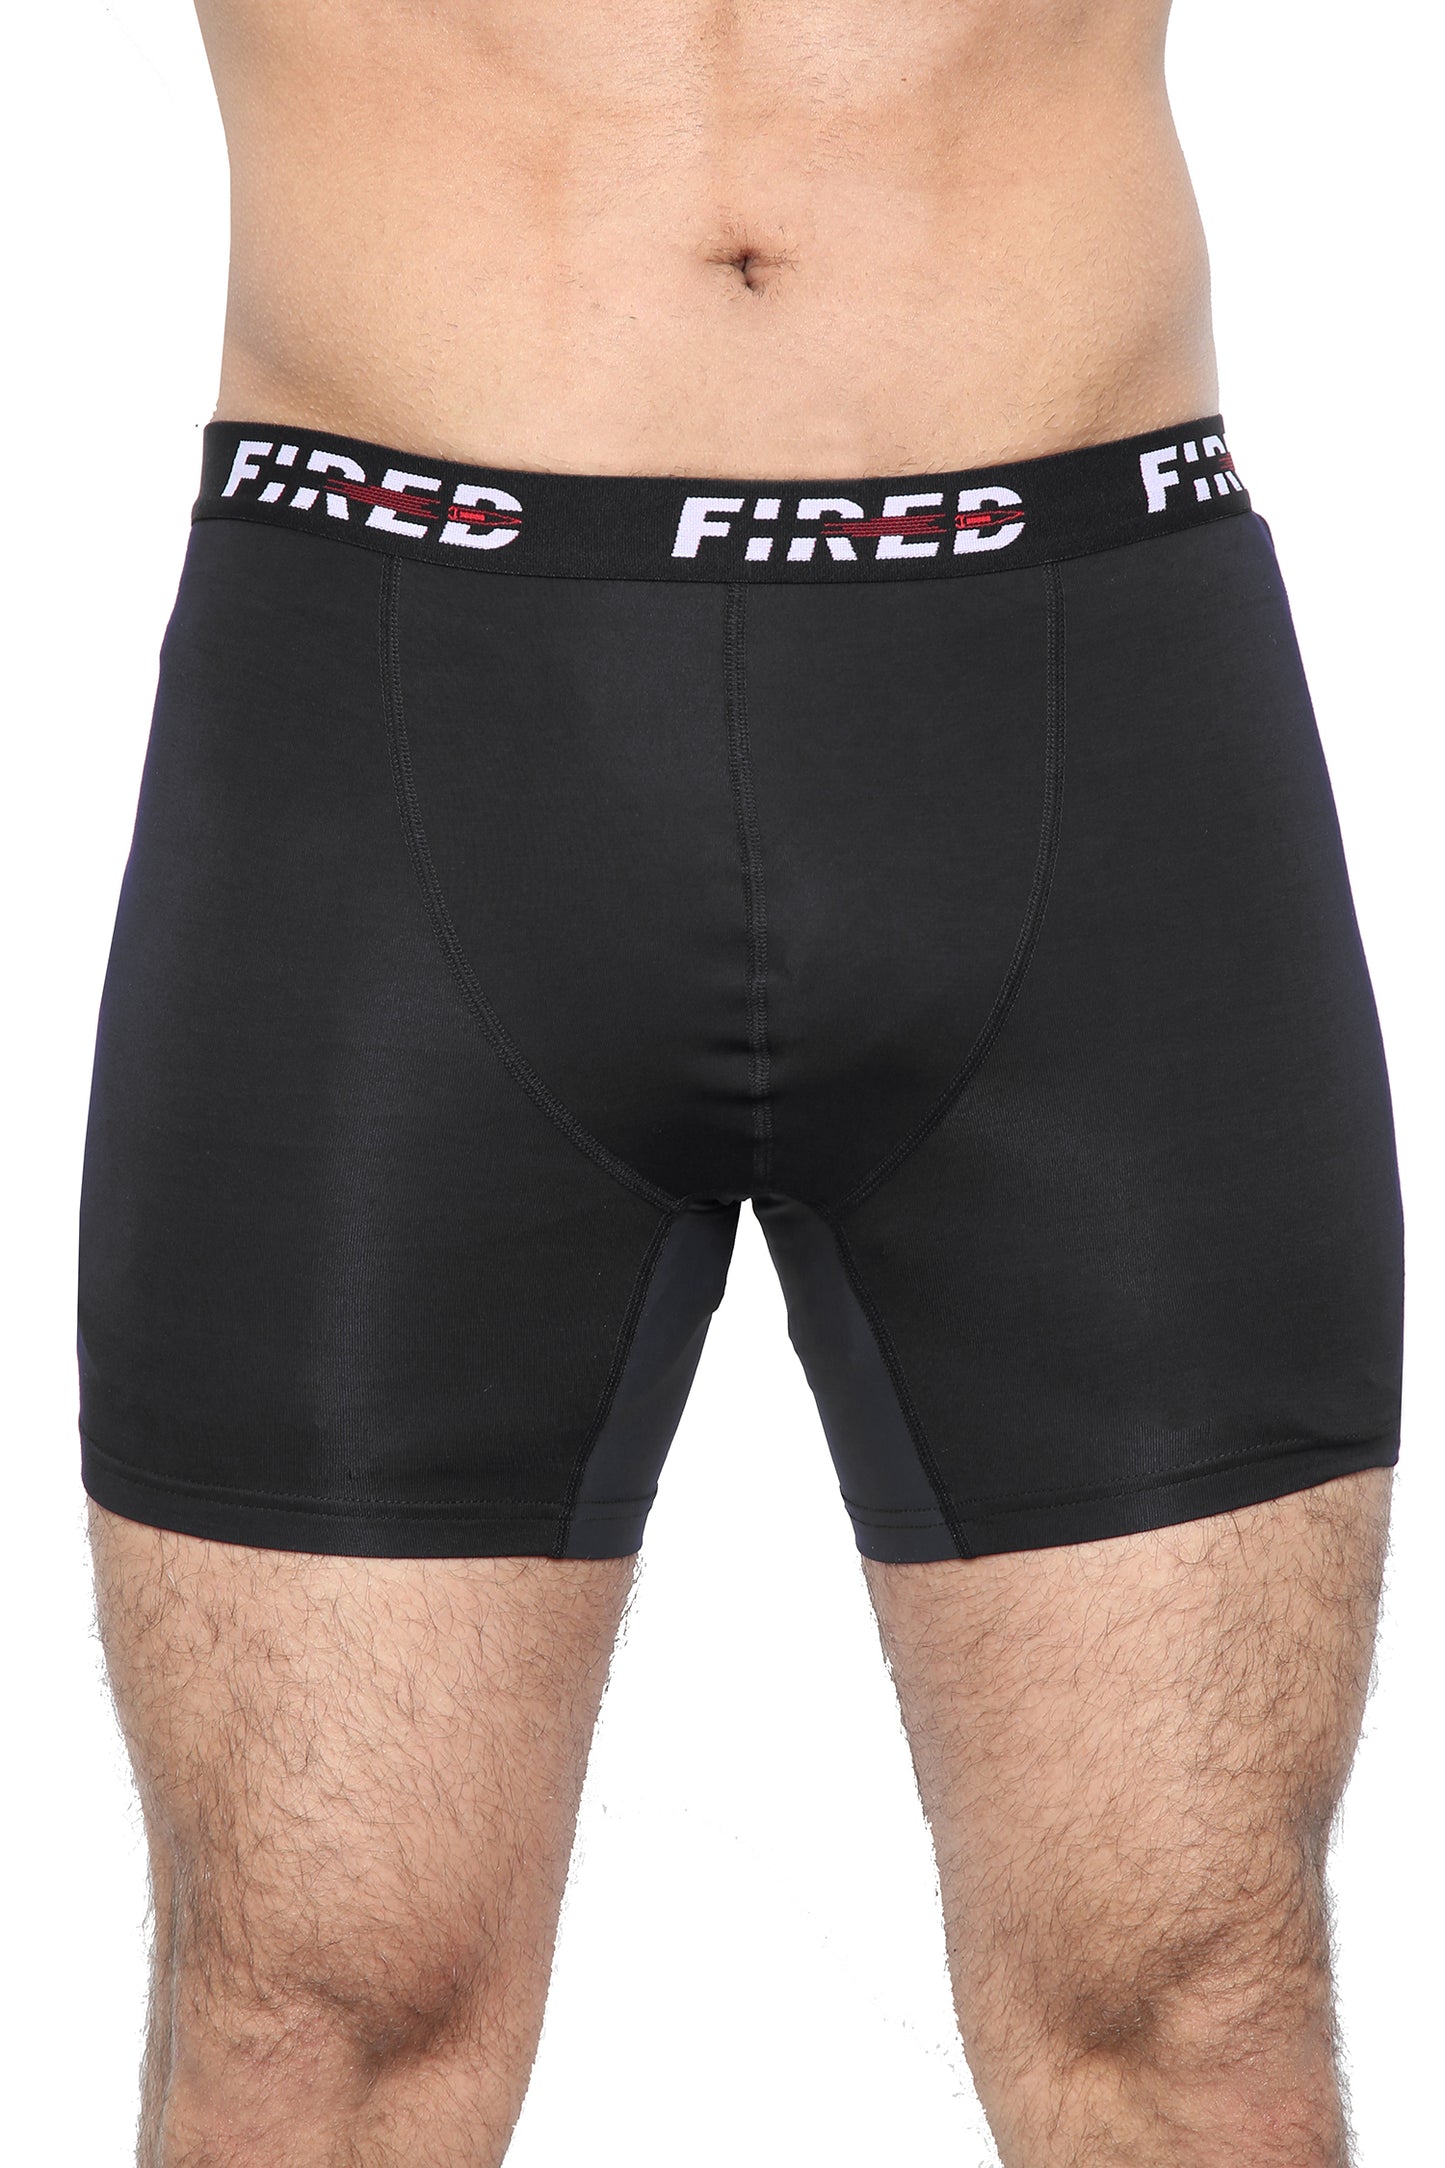 Fired Men's 3 Pack Boxers